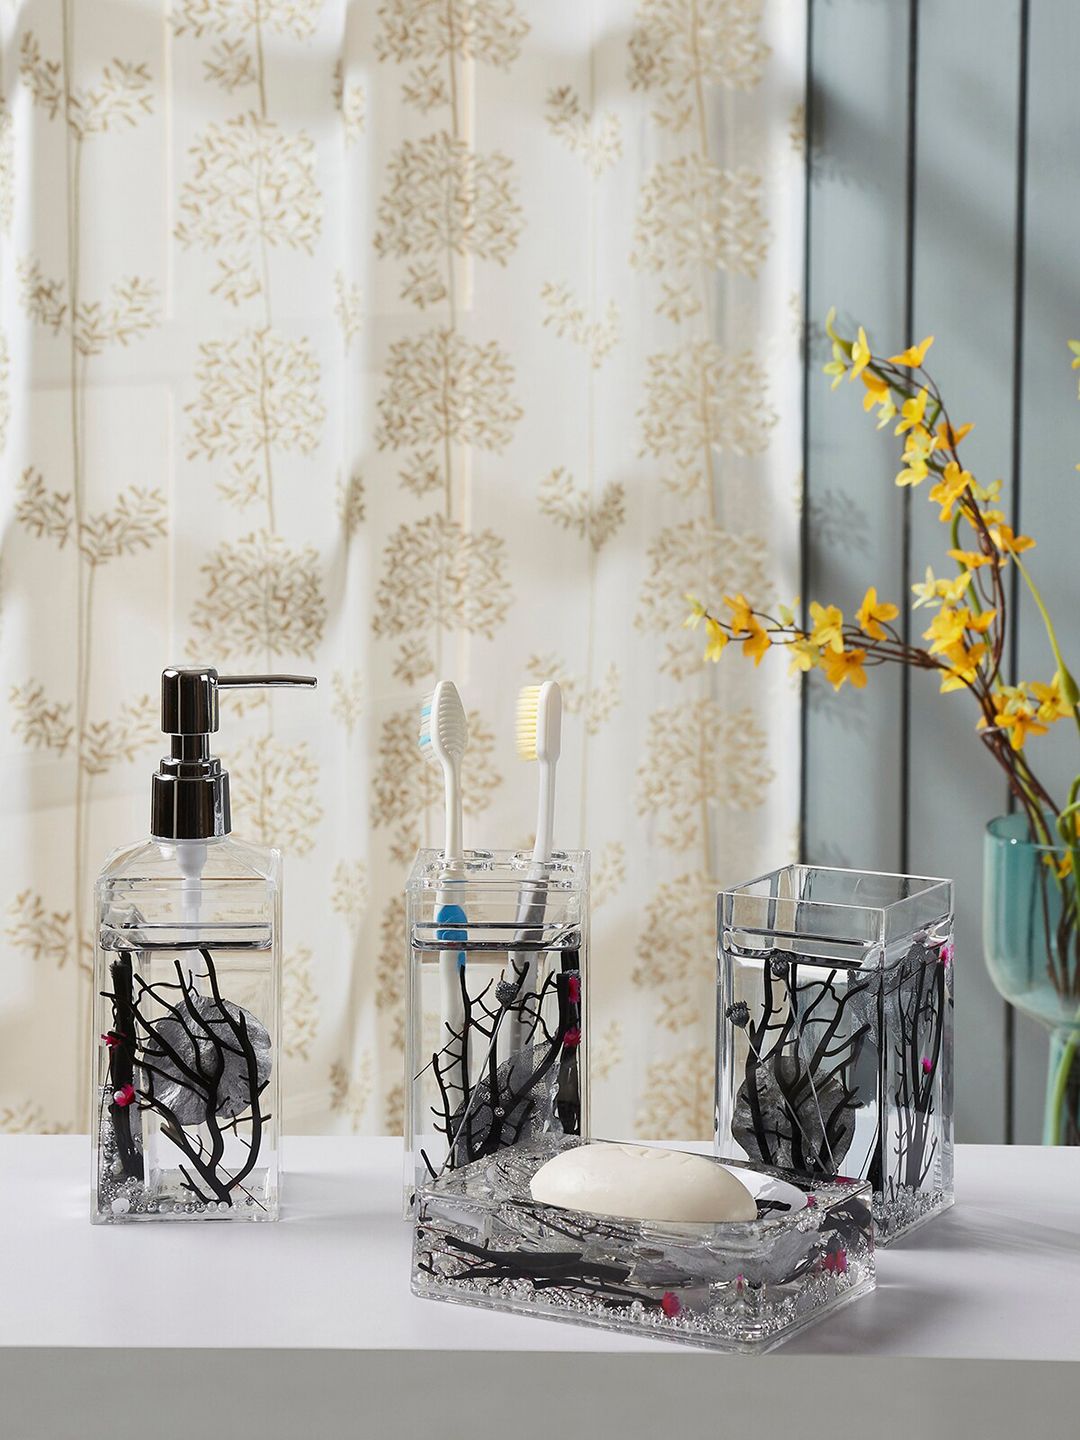 OBSESSIONS Set Of 4 Black & Silver-Toned Printed Bathroom Accessories Price in India